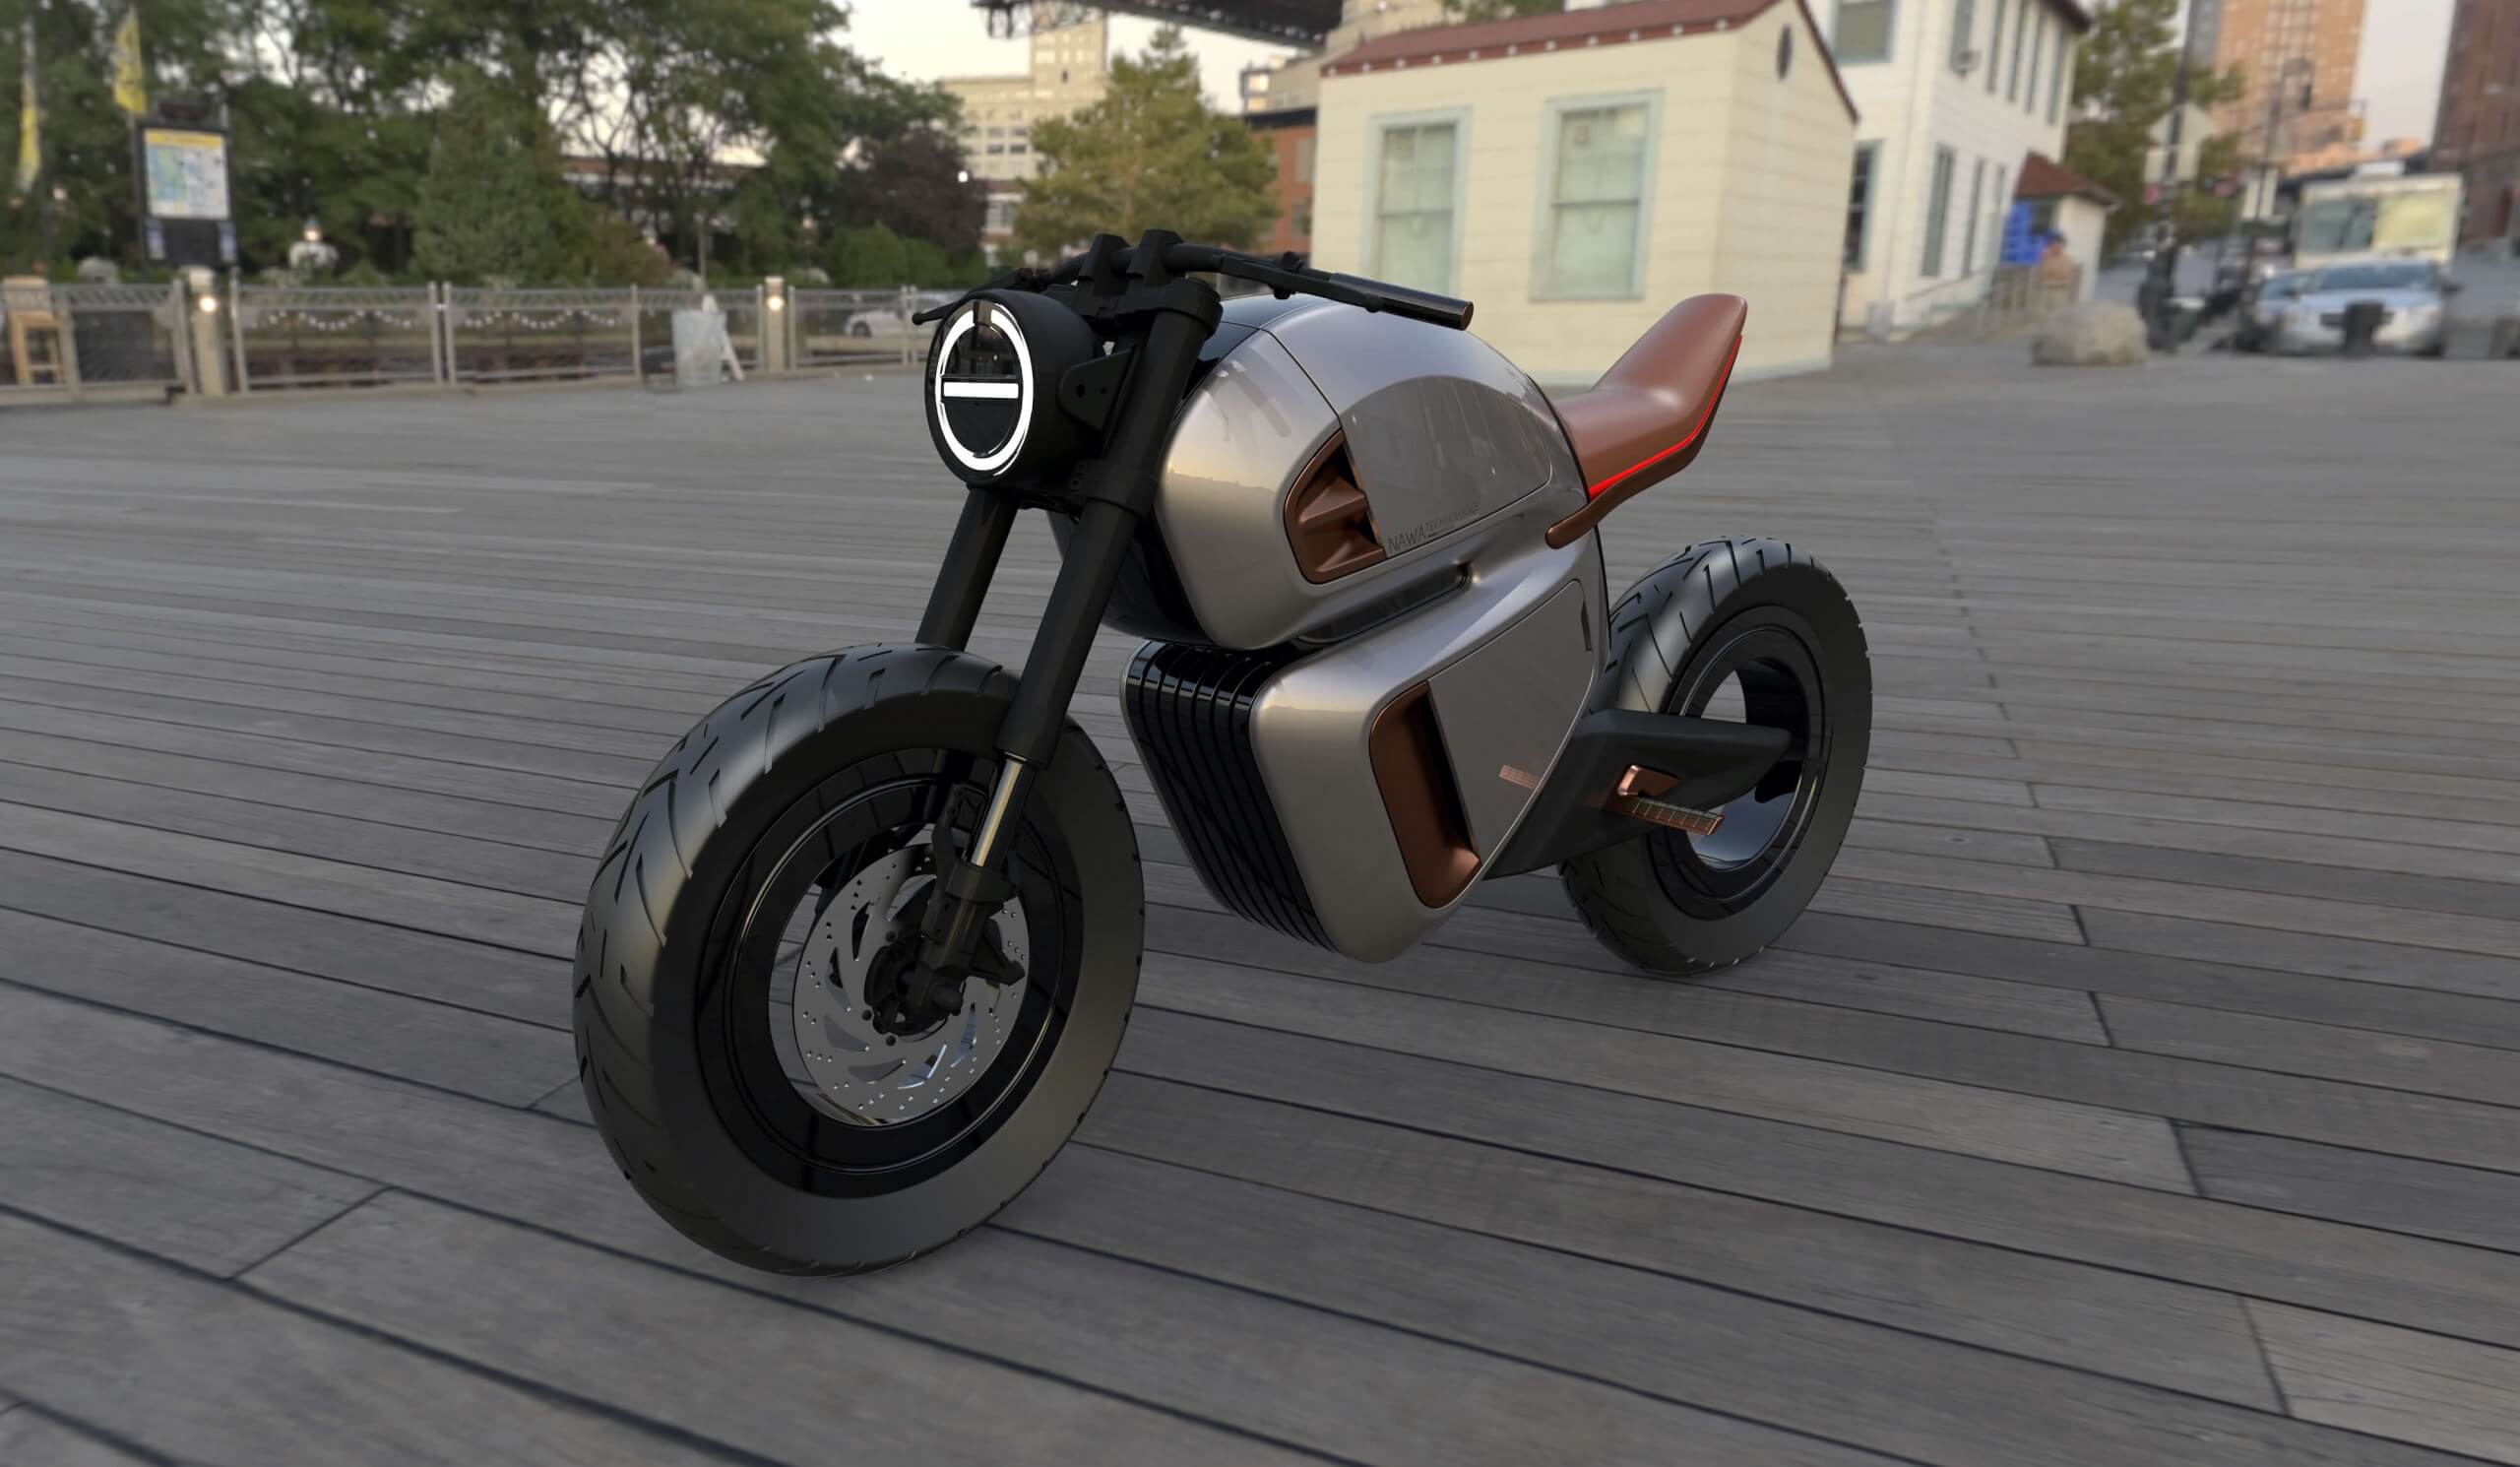 A view of the world's first hybrid electric motorcycle, available from NAWA and debuting as an electric motorbike concept for 2021 EICMA: Press release media, side front view